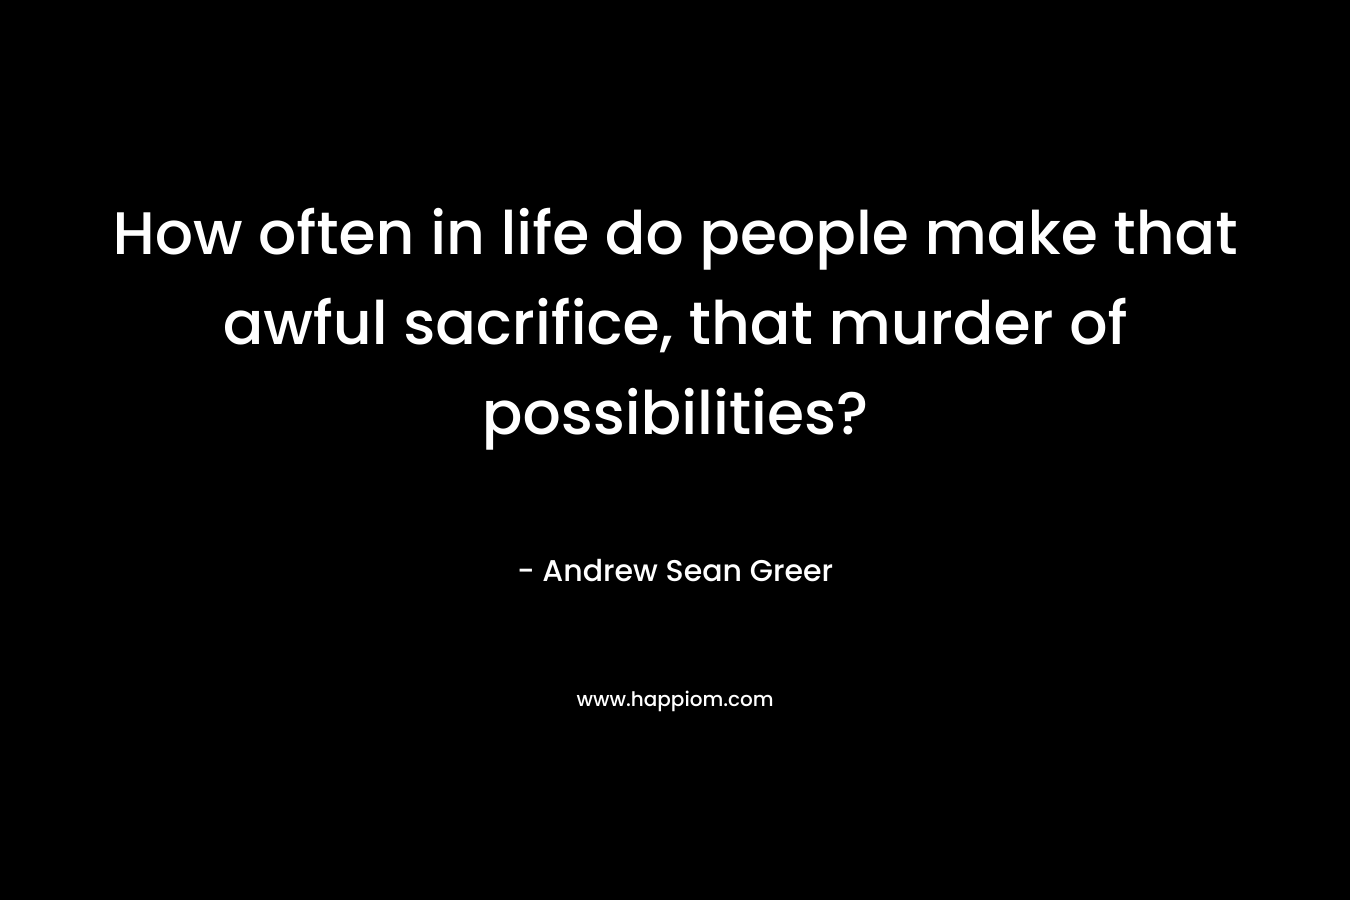 How often in life do people make that awful sacrifice, that murder of possibilities?